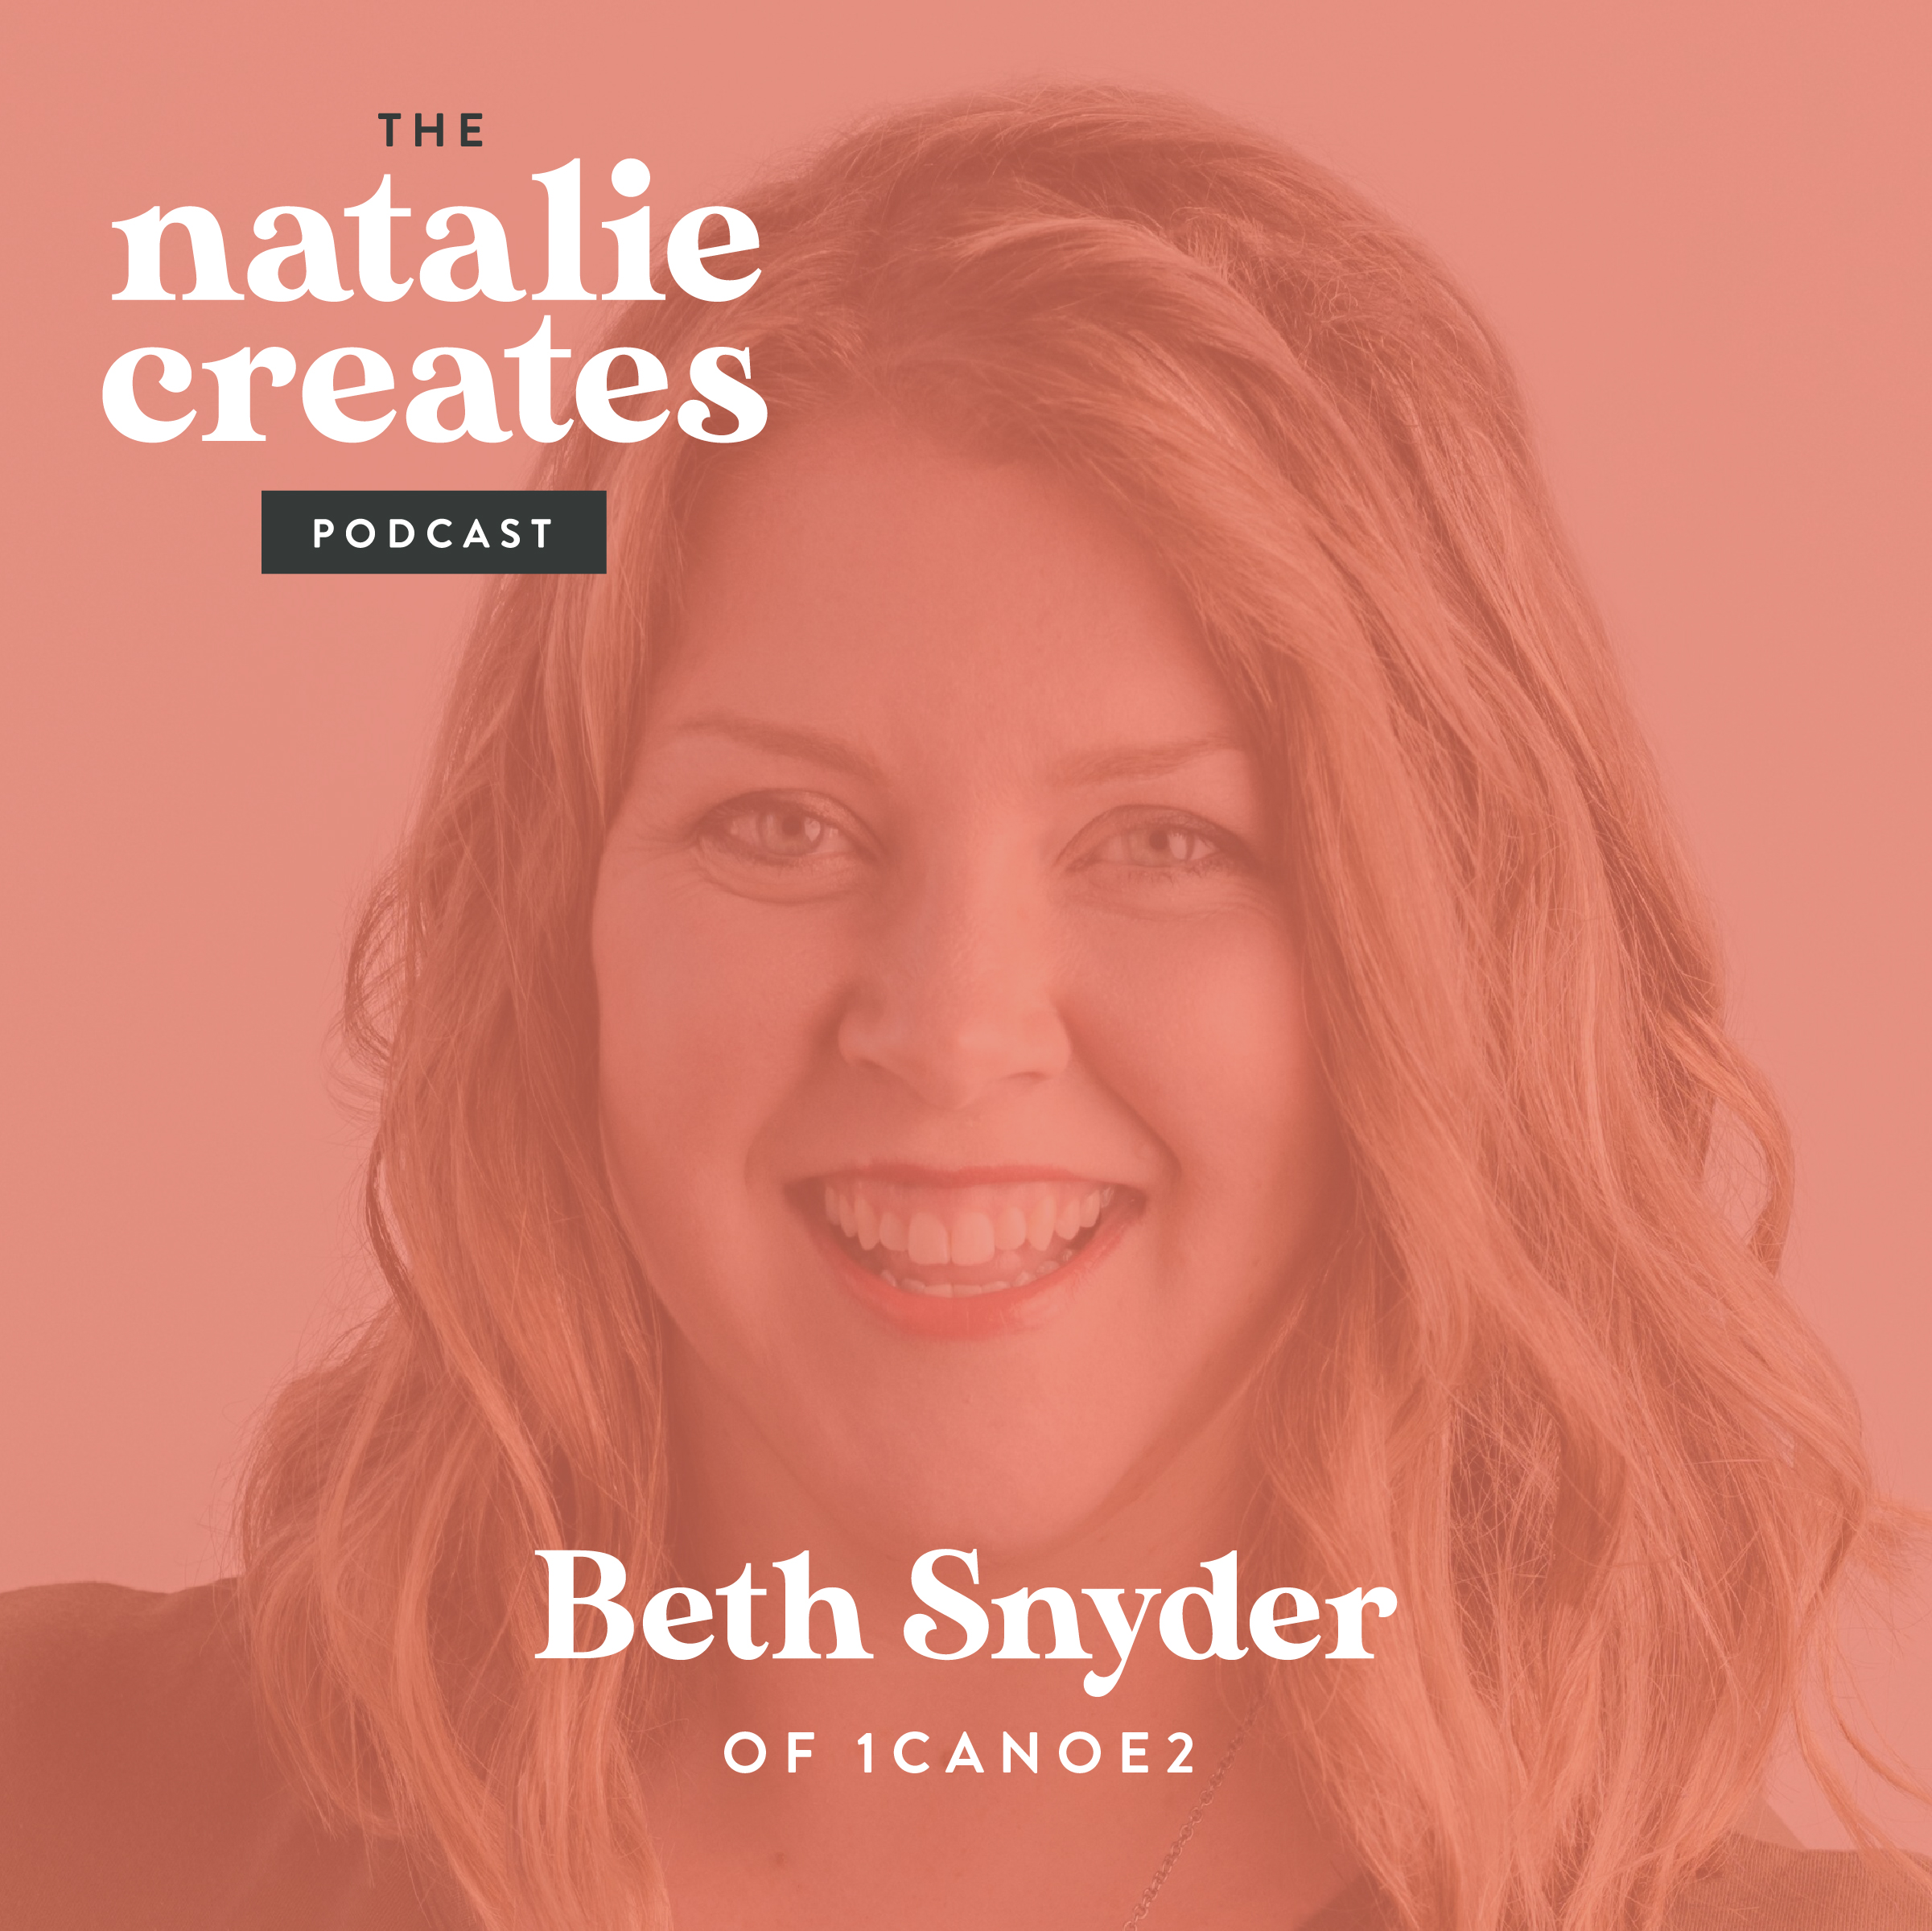 2. How to Build Community and Culture with Beth Snyder of 1canoe2